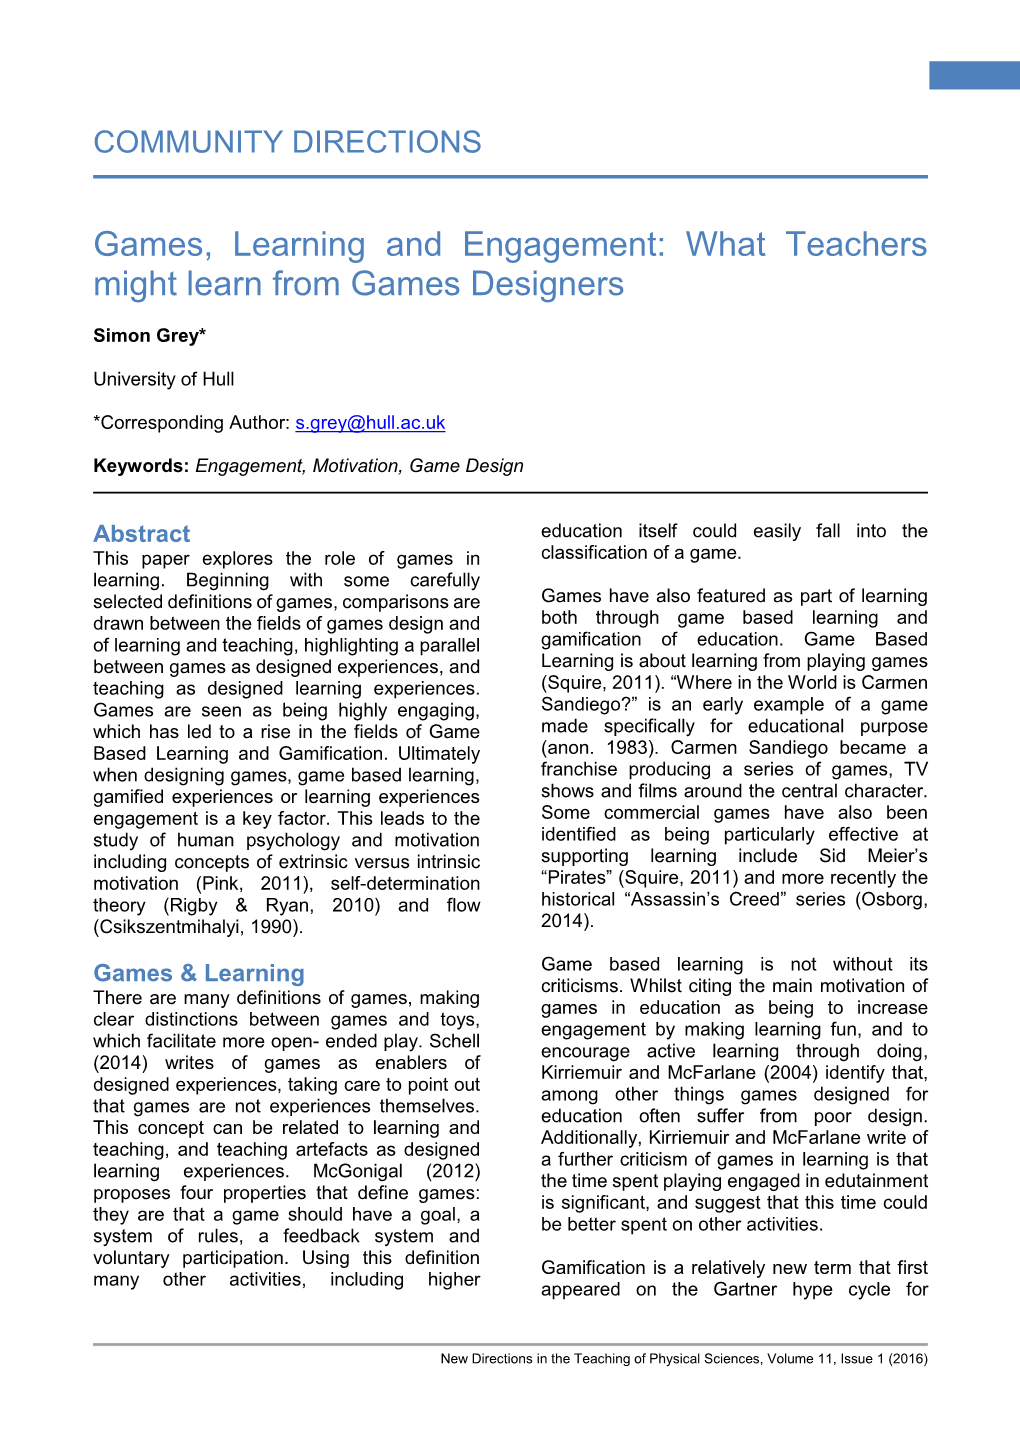 Games, Learning and Engagement: What Teachers Might Learn from Games Designers